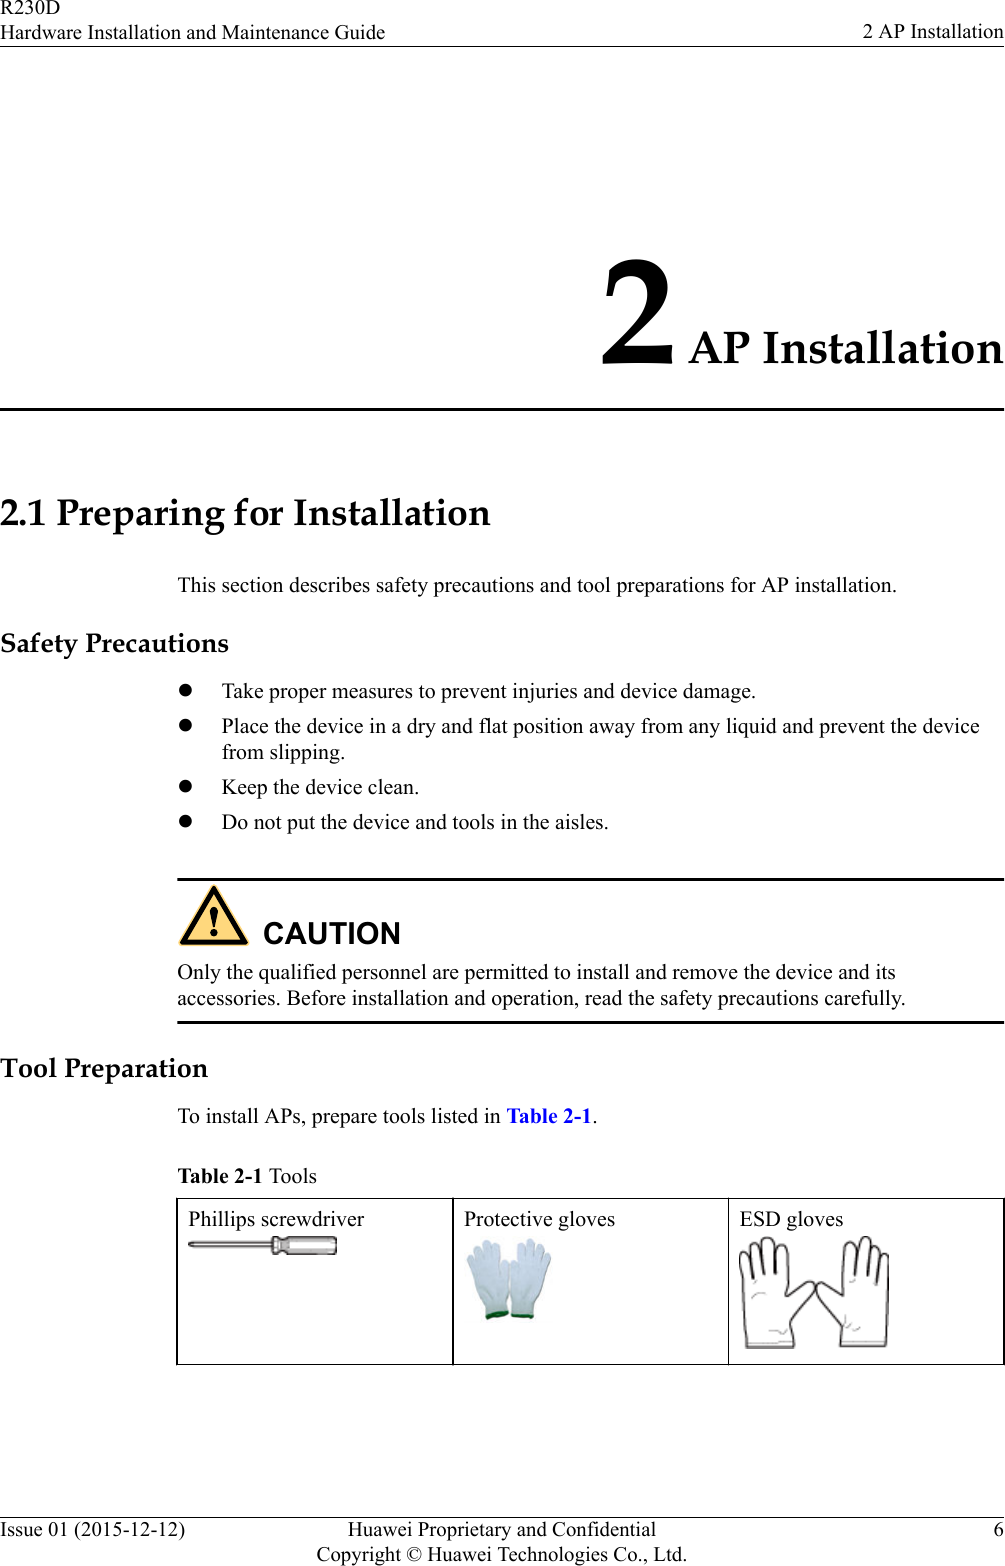 2 AP Installation2.1 Preparing for InstallationThis section describes safety precautions and tool preparations for AP installation.Safety PrecautionslTake proper measures to prevent injuries and device damage.lPlace the device in a dry and flat position away from any liquid and prevent the devicefrom slipping.lKeep the device clean.lDo not put the device and tools in the aisles.CAUTIONOnly the qualified personnel are permitted to install and remove the device and itsaccessories. Before installation and operation, read the safety precautions carefully.Tool PreparationTo install APs, prepare tools listed in Table 2-1.Table 2-1 ToolsPhillips screwdriver Protective gloves ESD glovesR230DHardware Installation and Maintenance Guide 2 AP InstallationIssue 01 (2015-12-12) Huawei Proprietary and ConfidentialCopyright © Huawei Technologies Co., Ltd.6